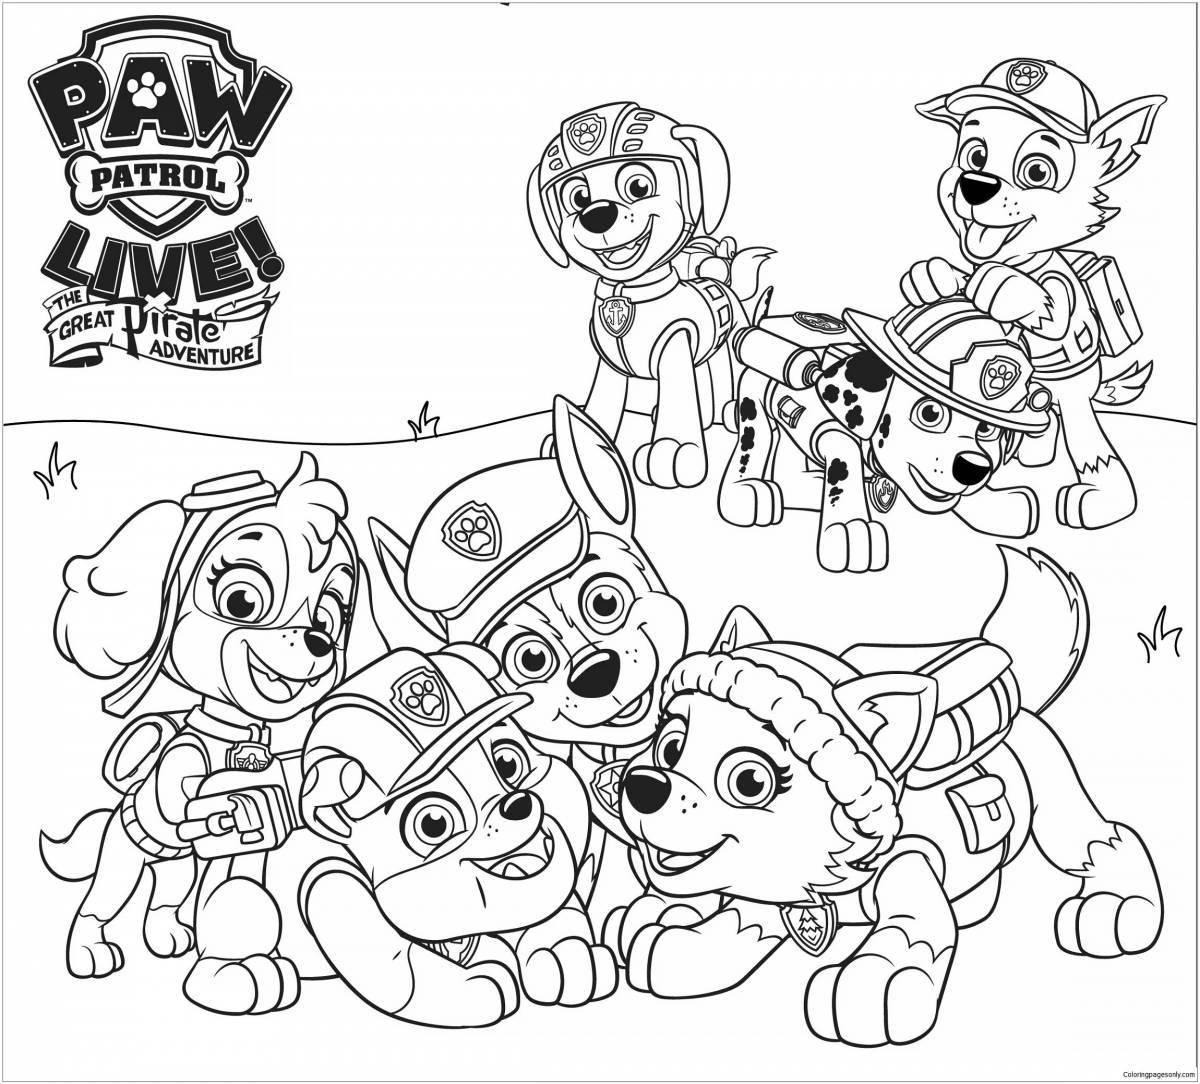 Cute paw patrol coloring page